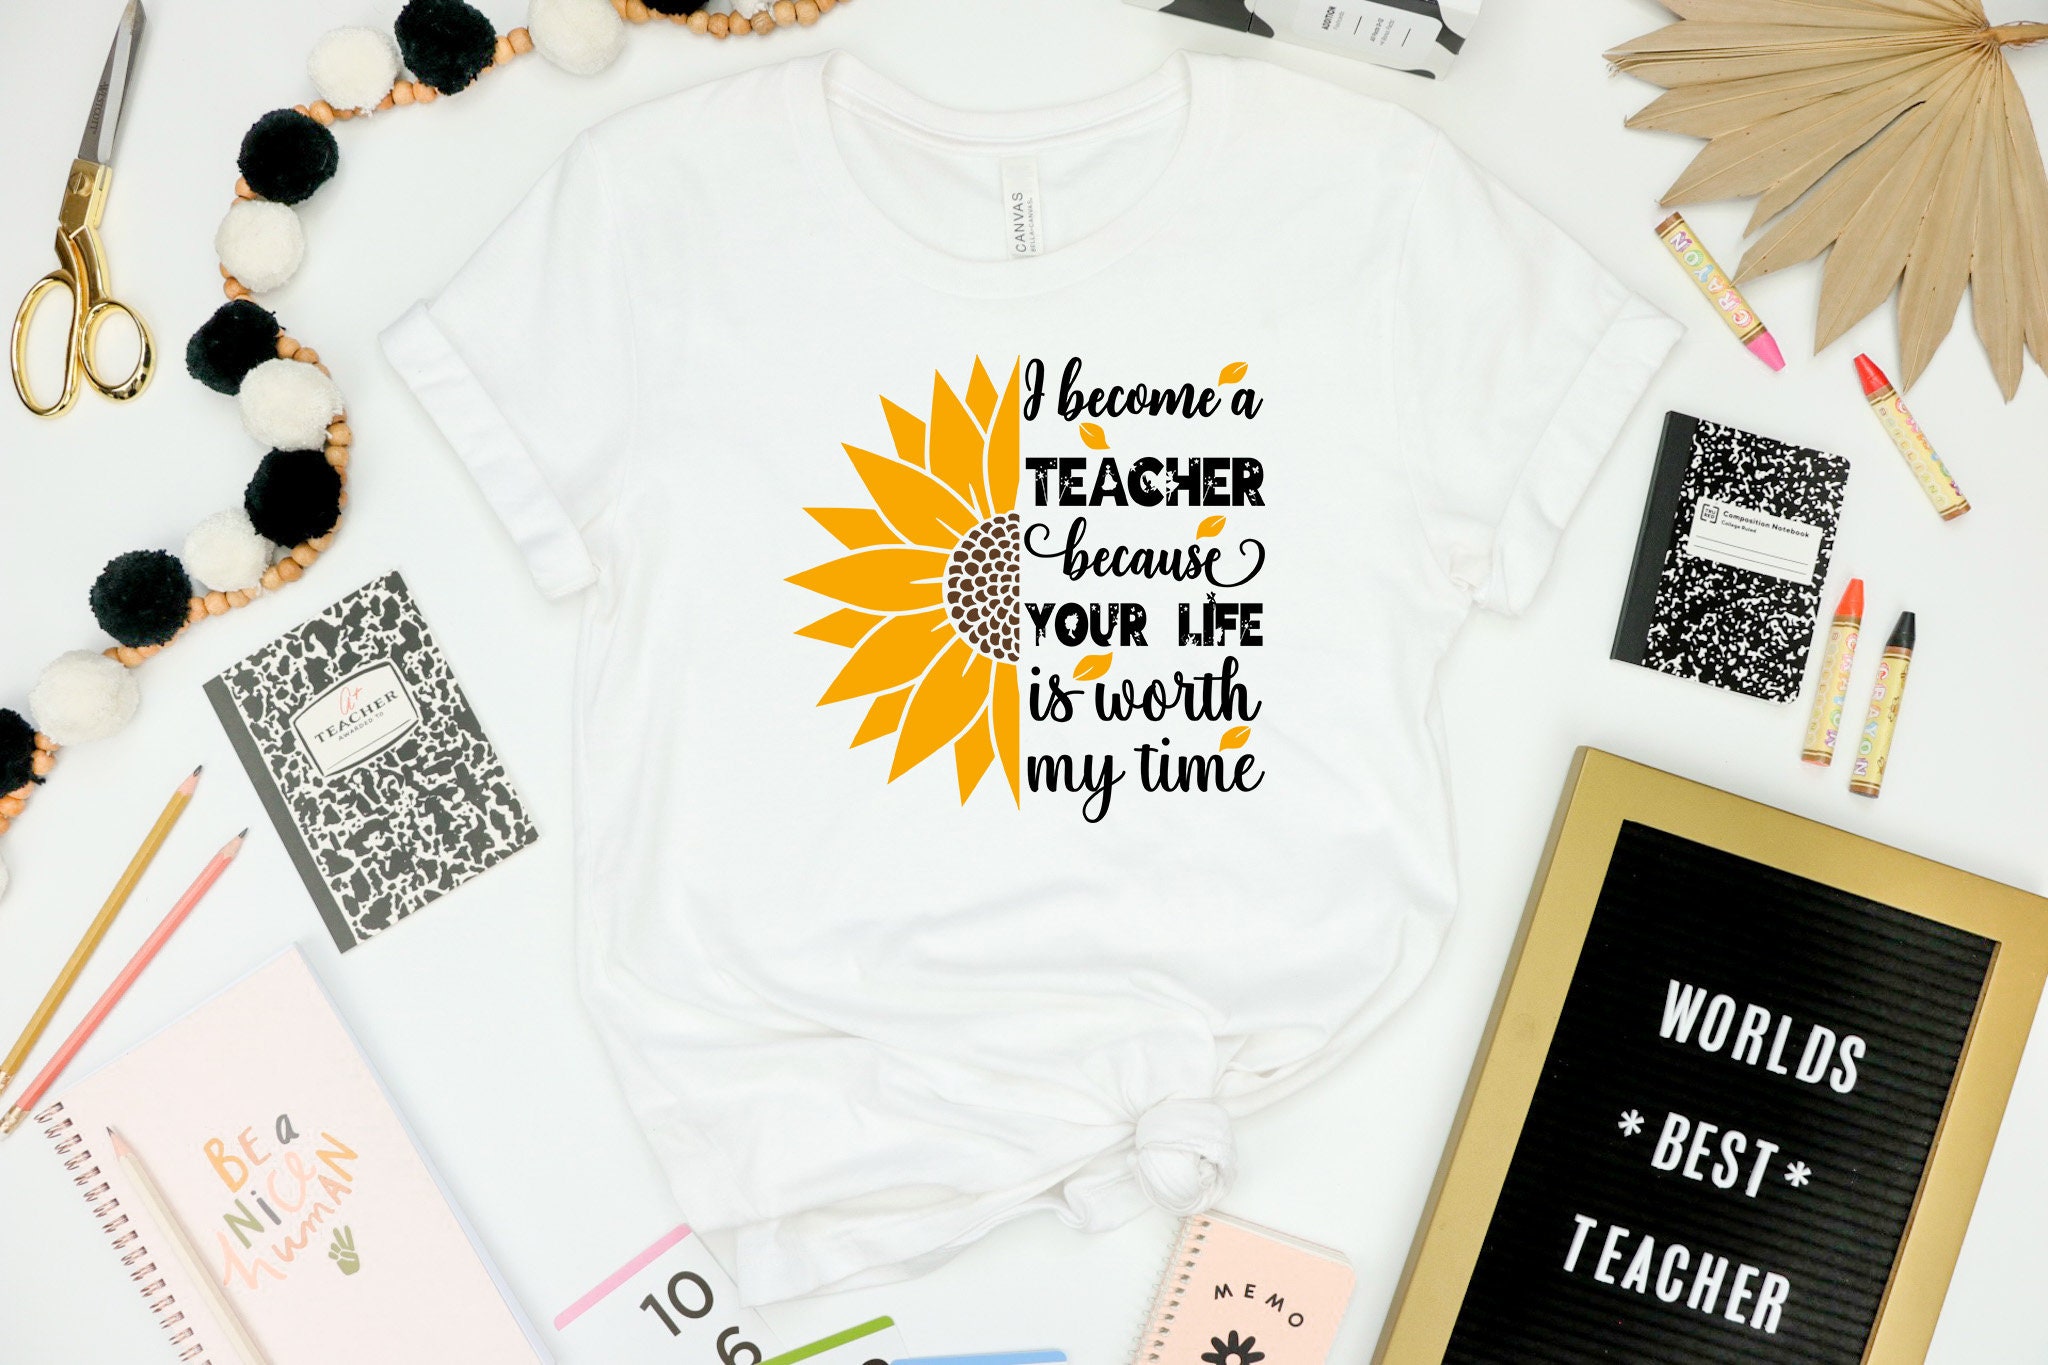 Discover I Become A Teacher Because Your Life Is Worth My Time Shirt, Teacher Sunflower Shirt, Teacher Shirt, Teacher Life Shirt, Teacher Day Shirt